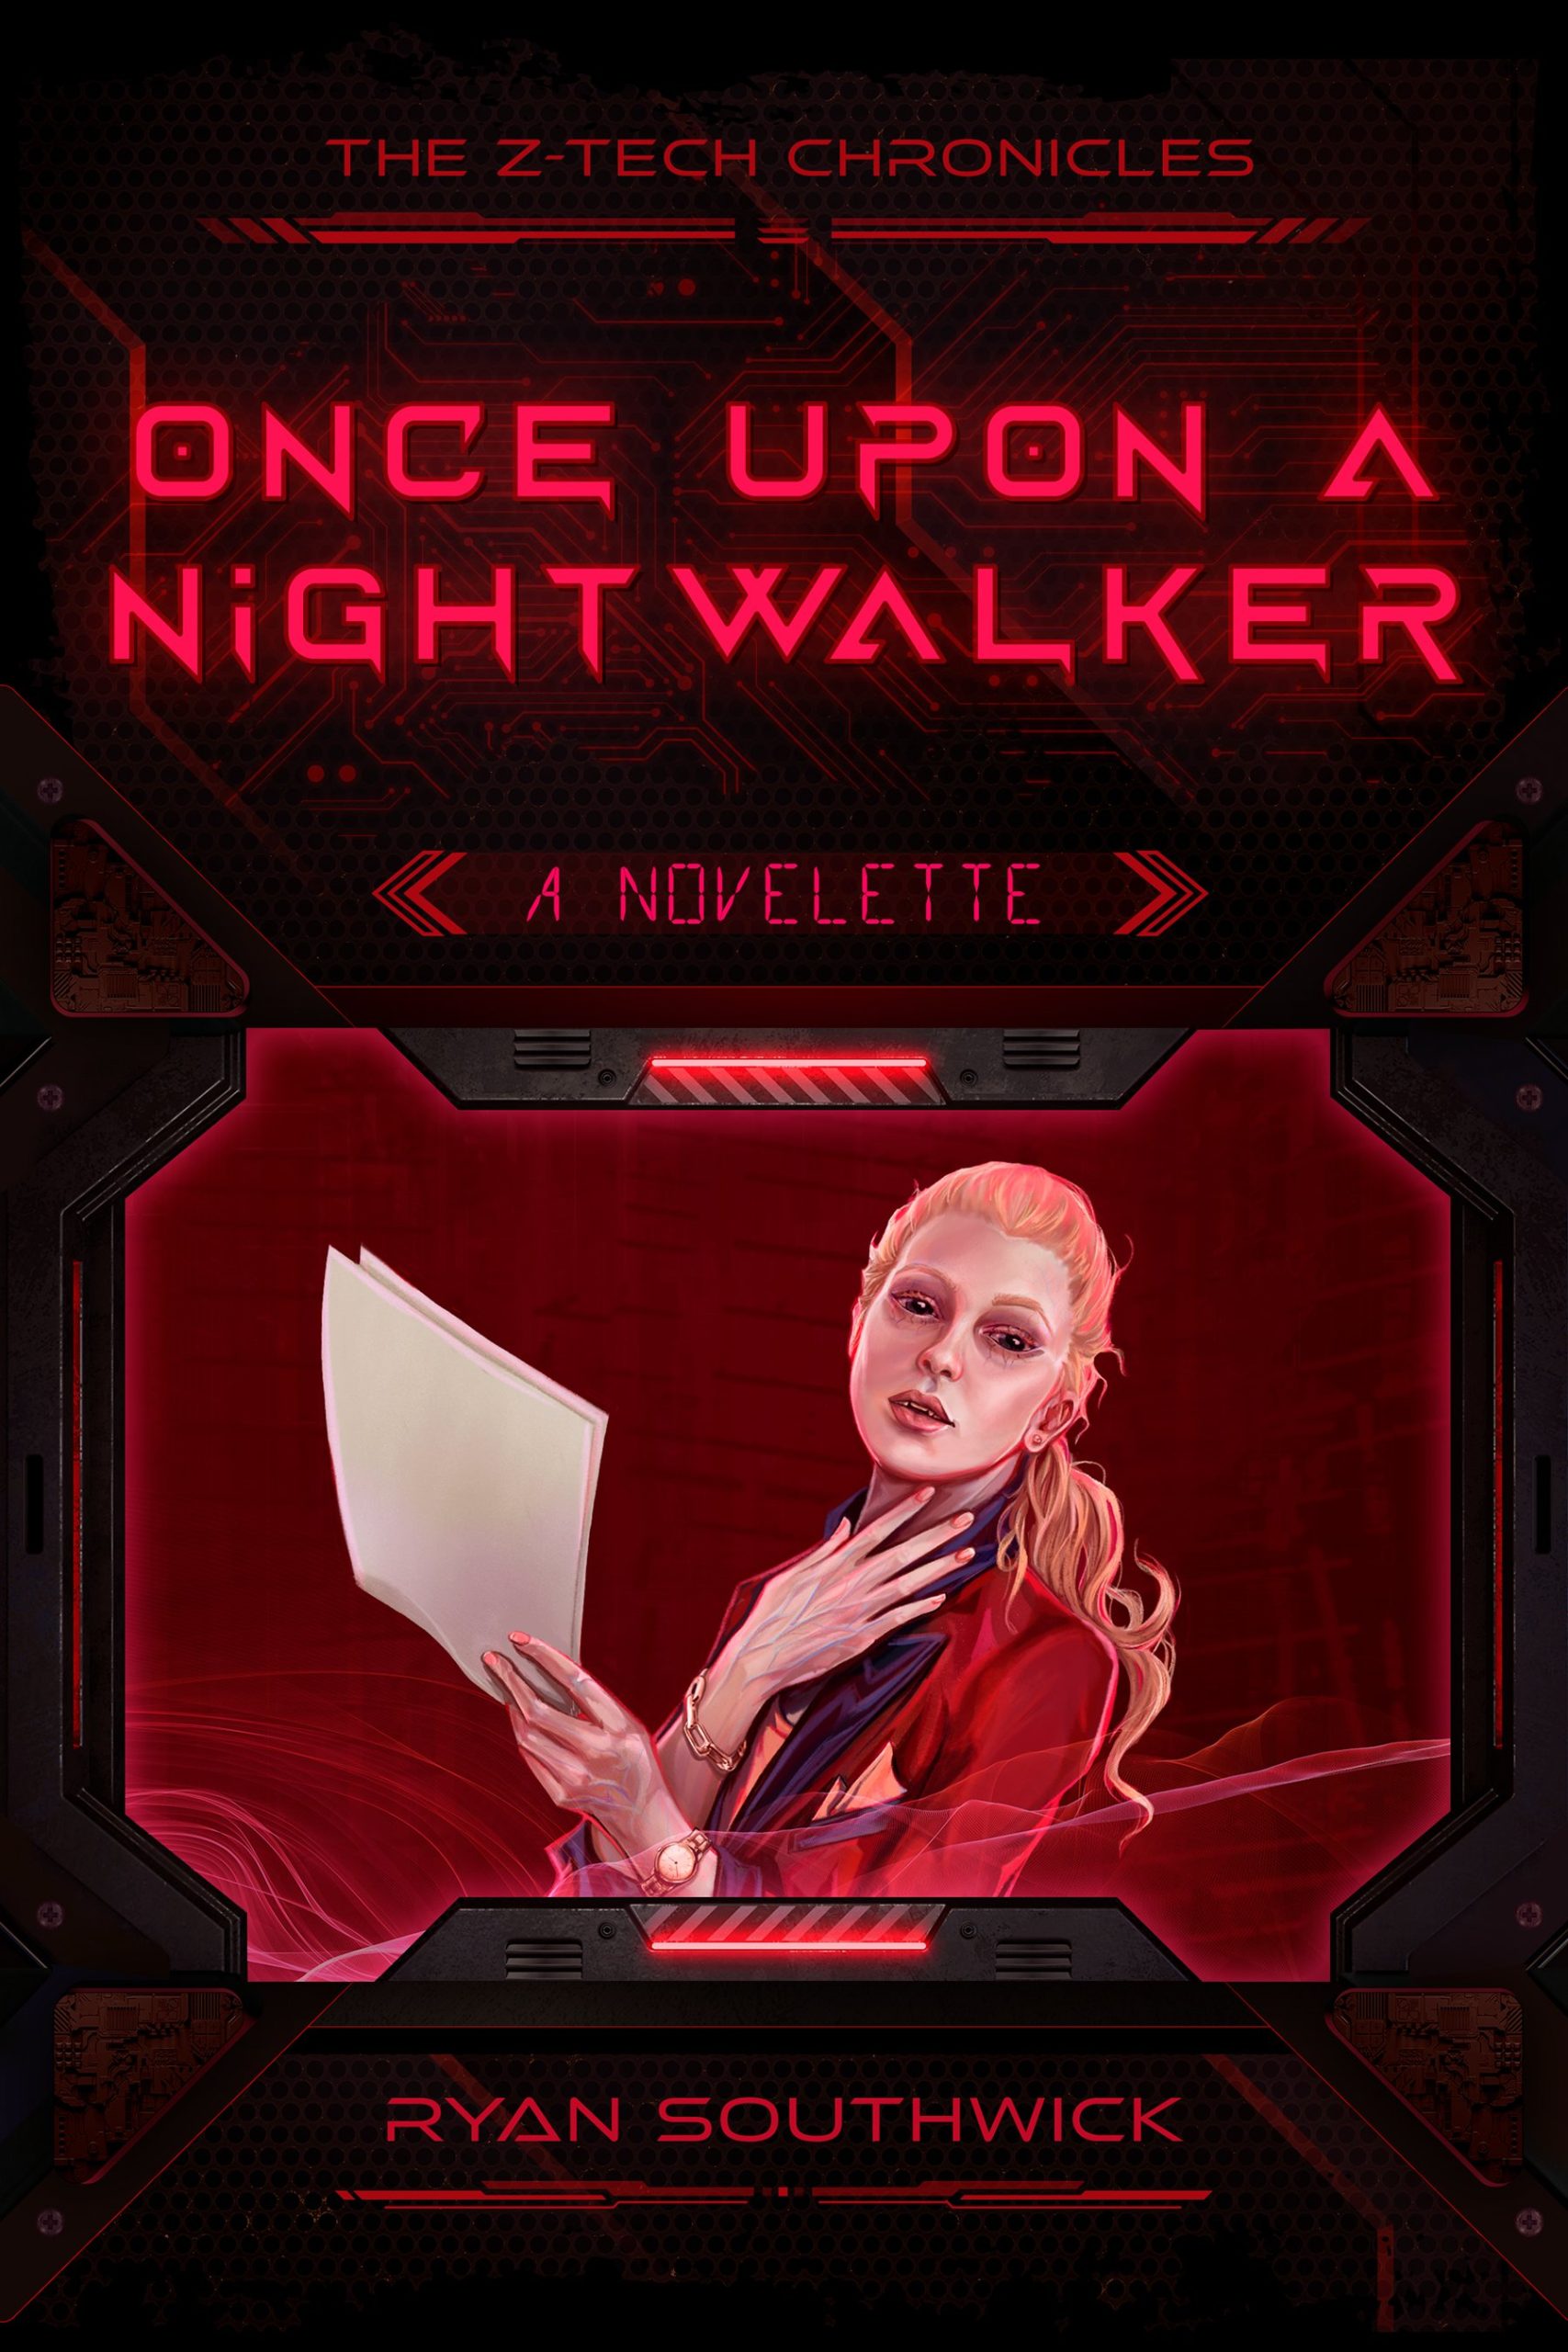 Once Upon a Nightwalker (front cover)